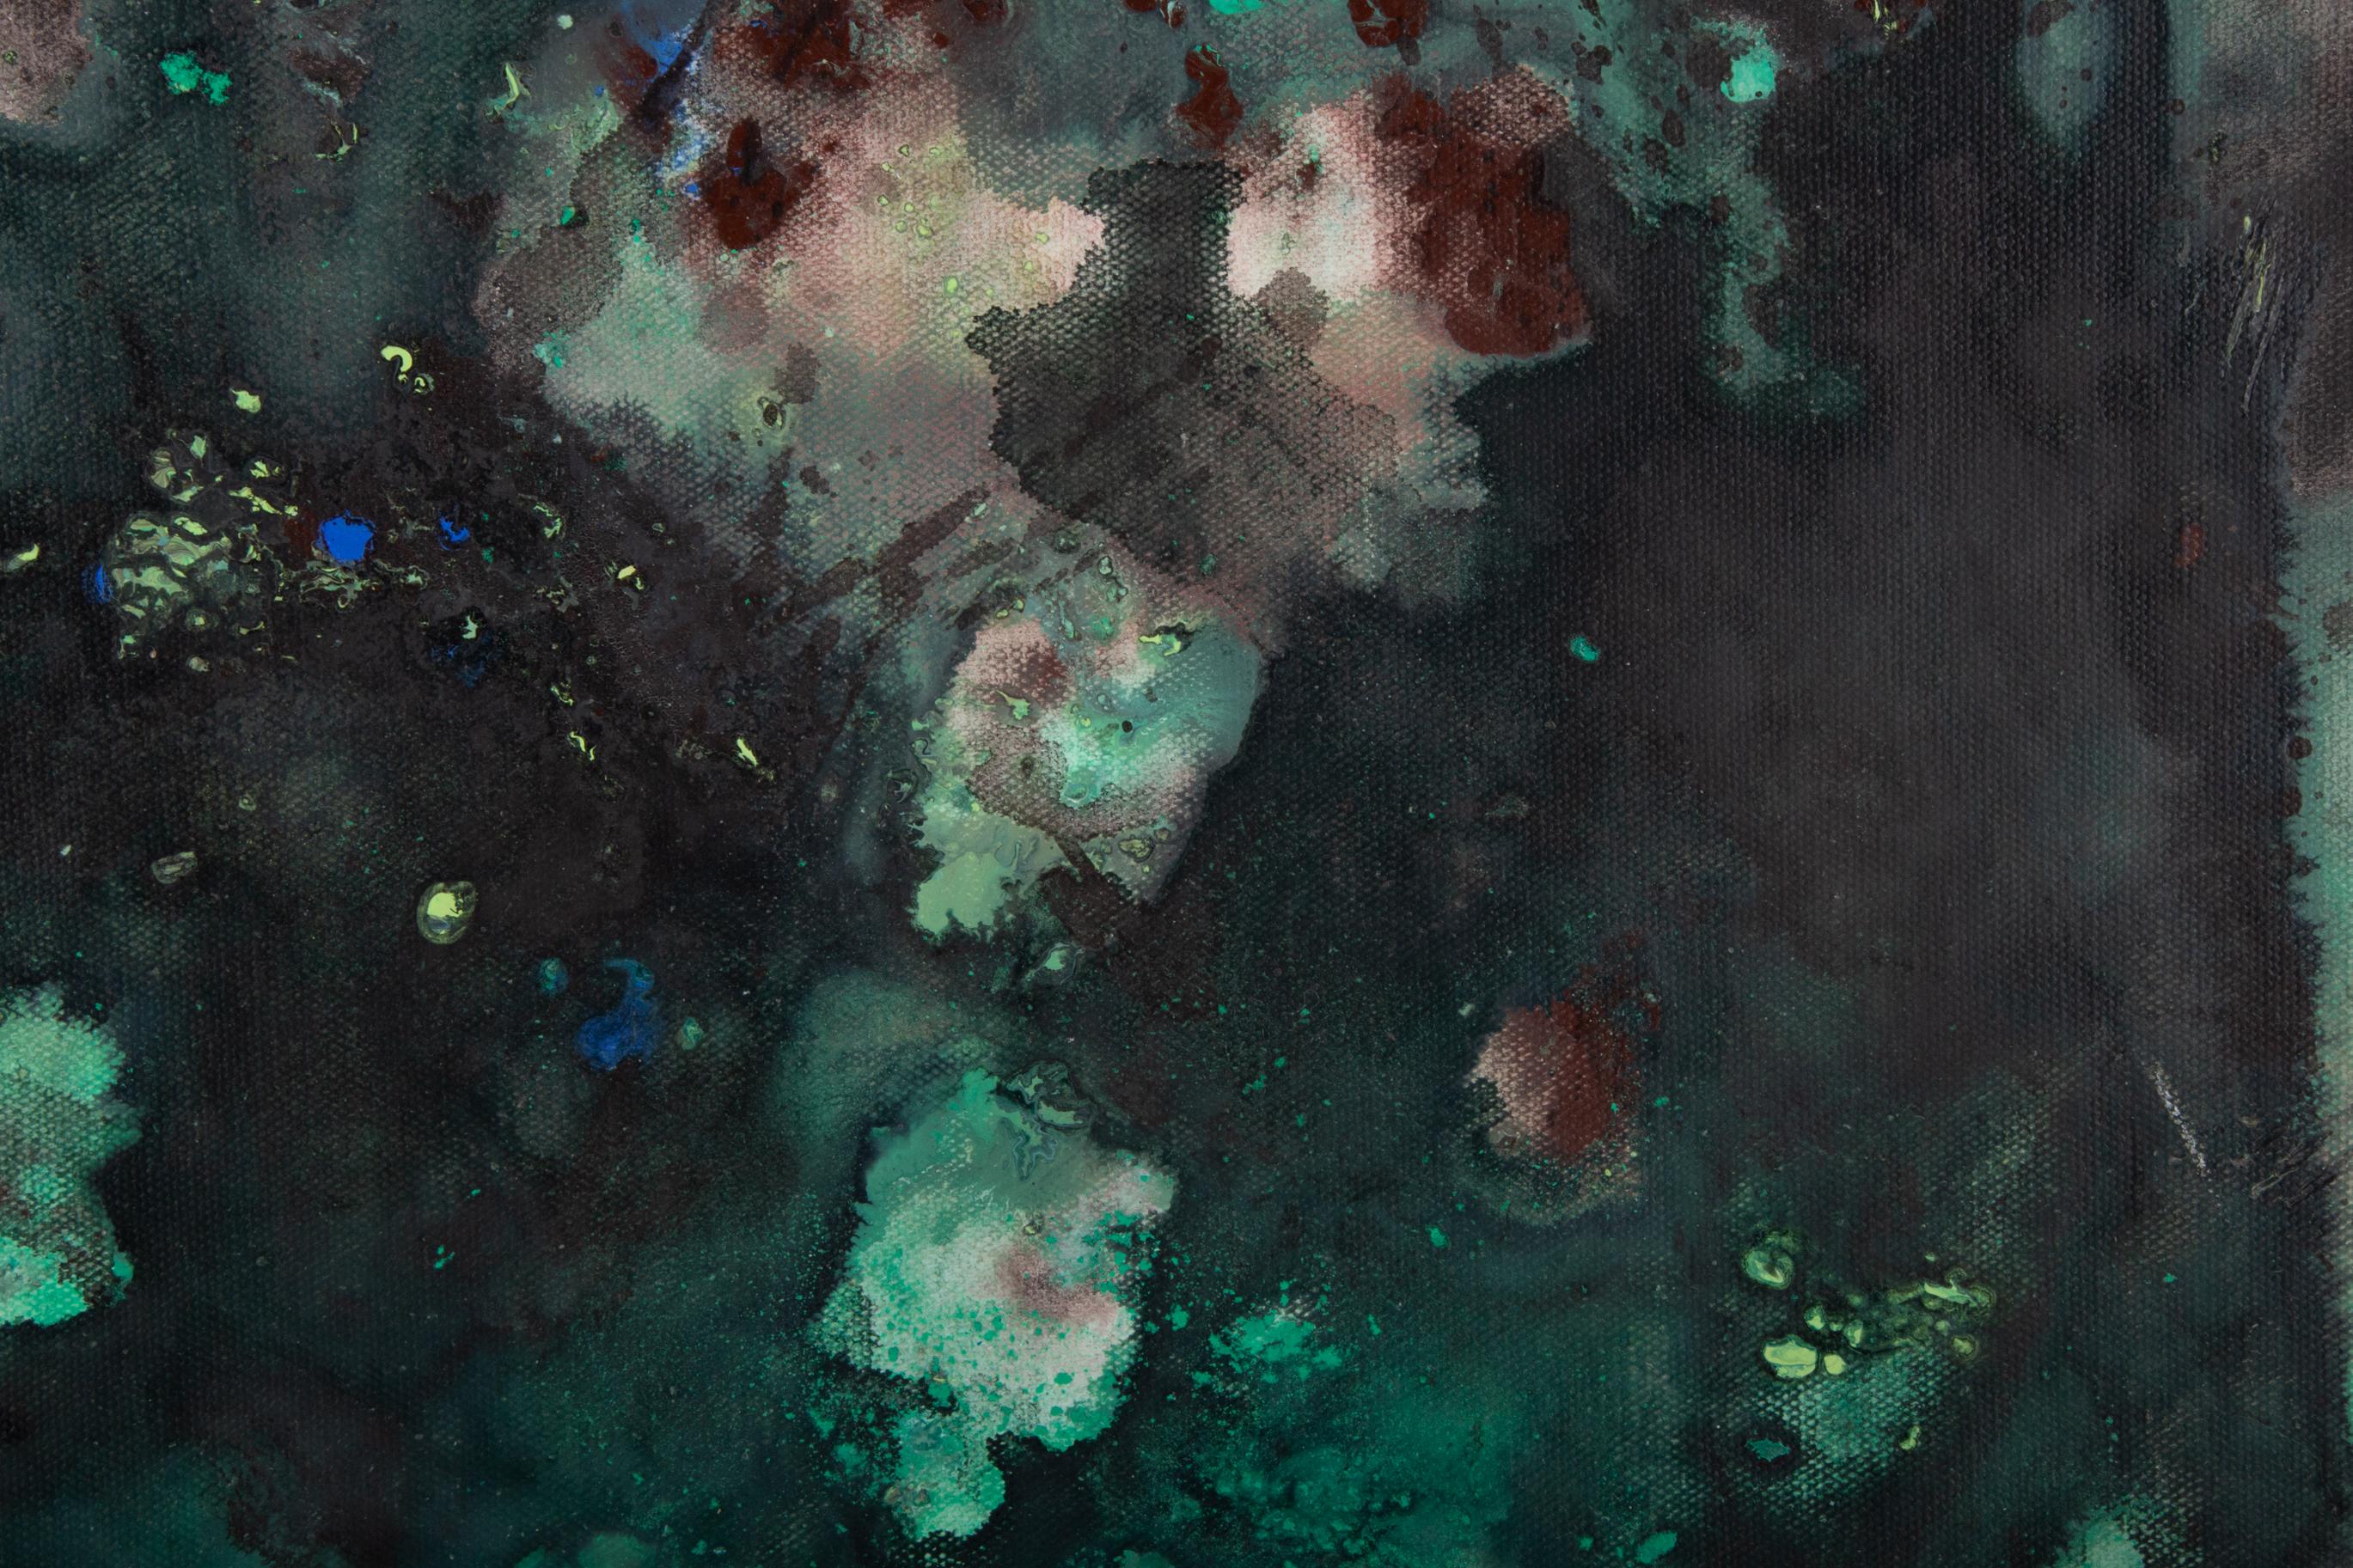 Chong Liu Abstract Original Oil On Canvas The Beginning Of Nature-Green In Black For Sale 4